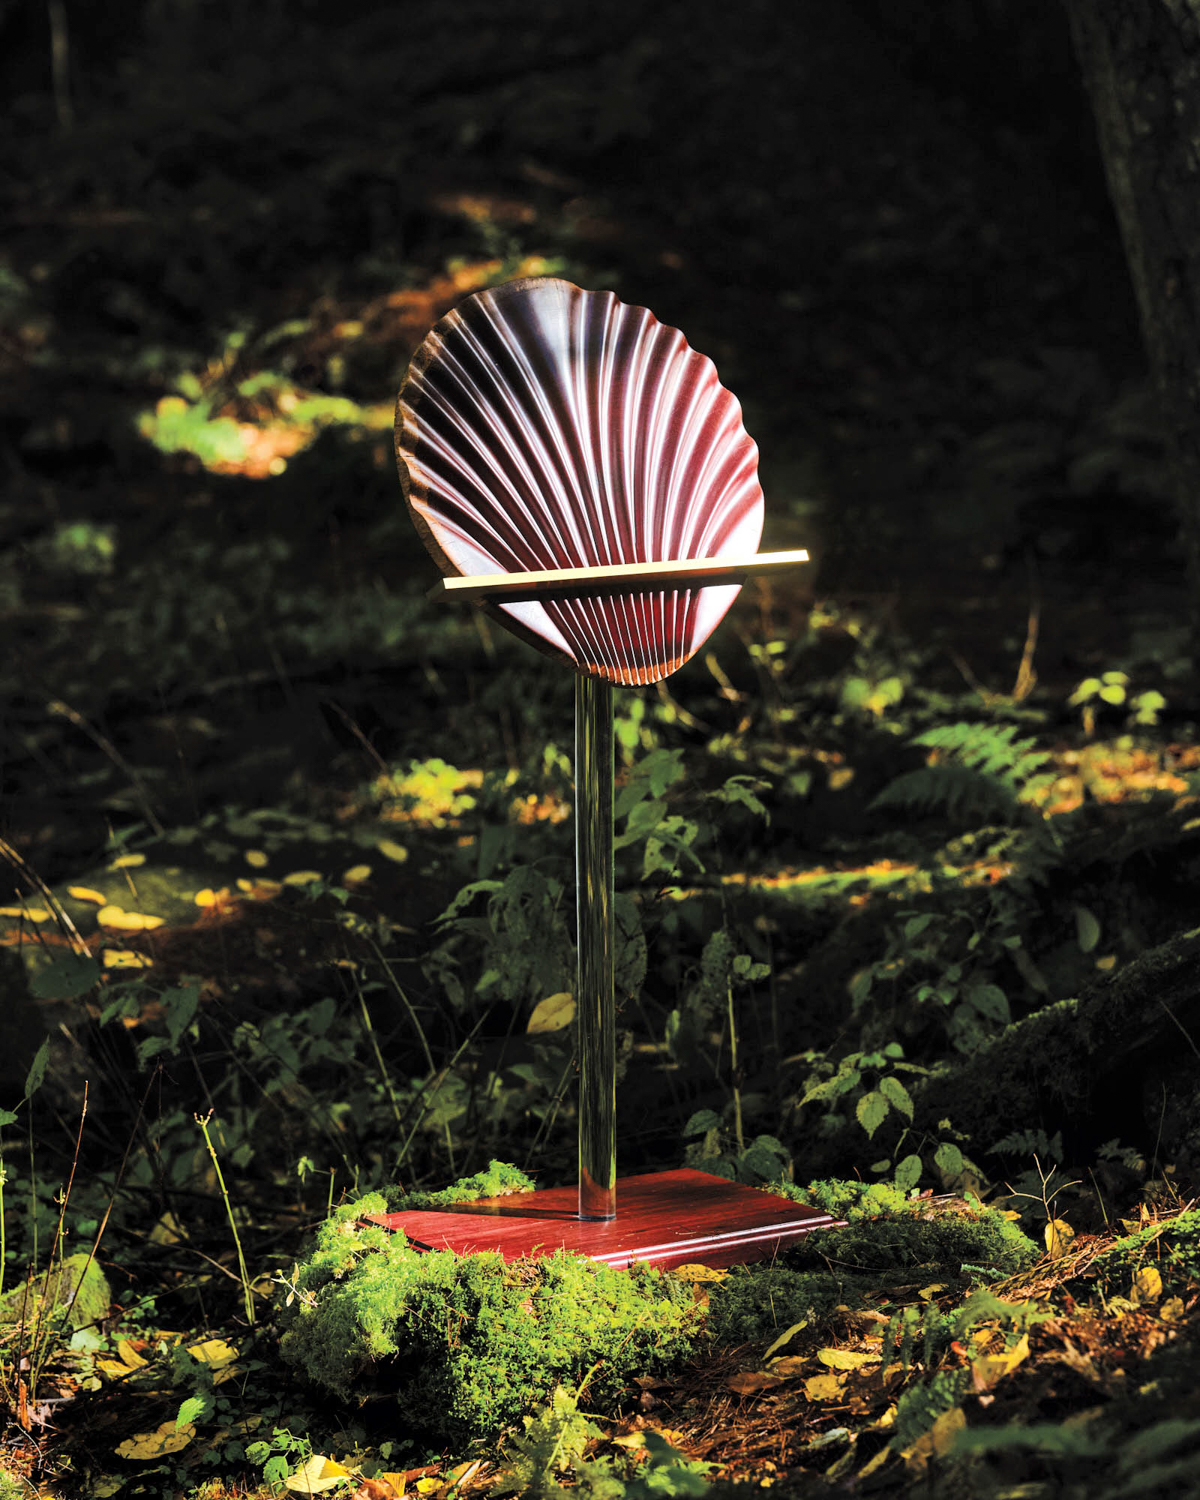 Tropical-wood shell-shaped music stand shot in the jungle